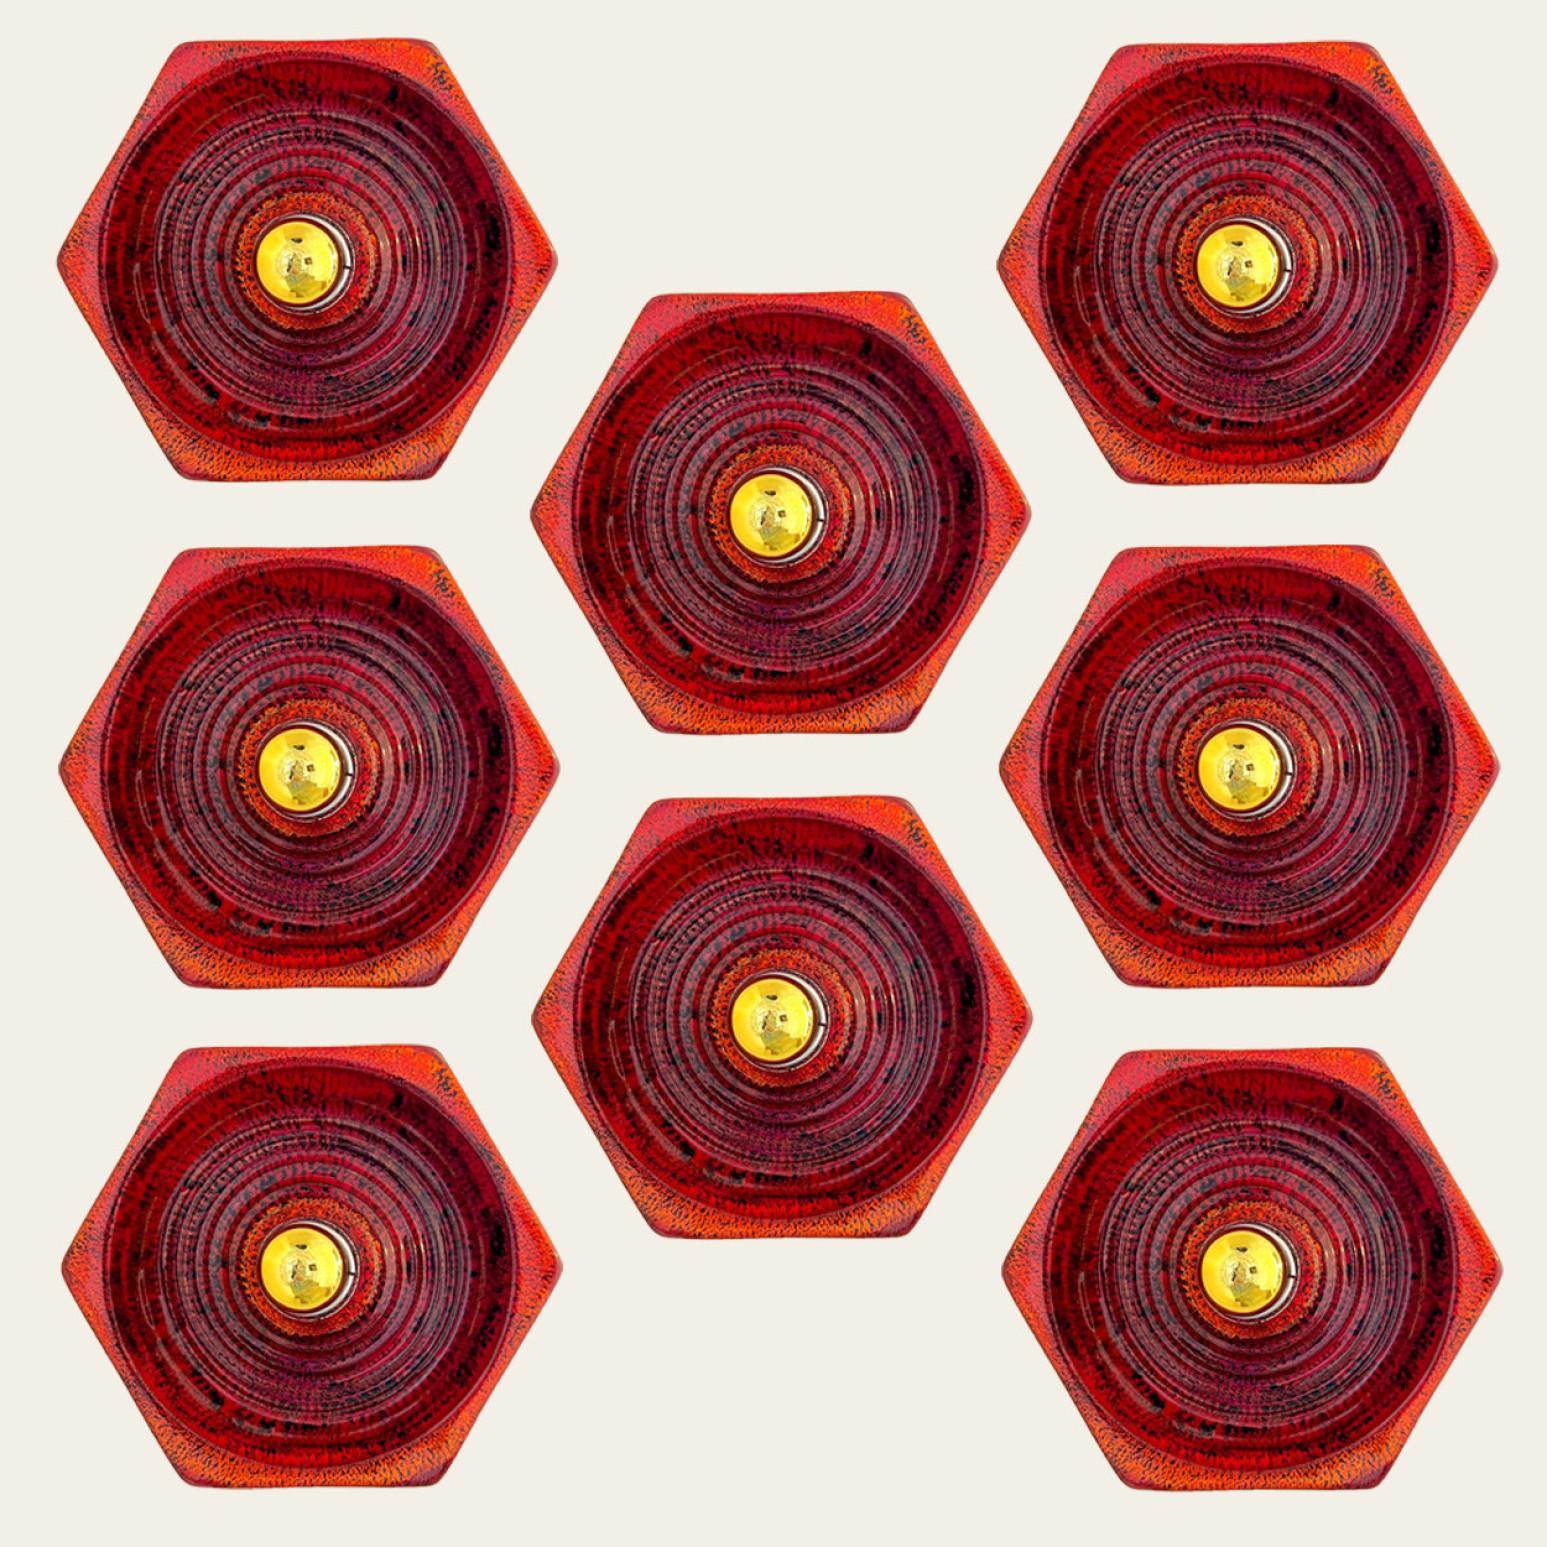 Eight hexagonal red ceramic wall lights. Manufactured by Hustadt Leuchten, Germany in the 1970s.
We used gold light bulbs (see images), but silver light bulbs are also very stylish.

Measurements:
Diameter: 11.81 in (30 cm)
Depth: 4.72 in (12